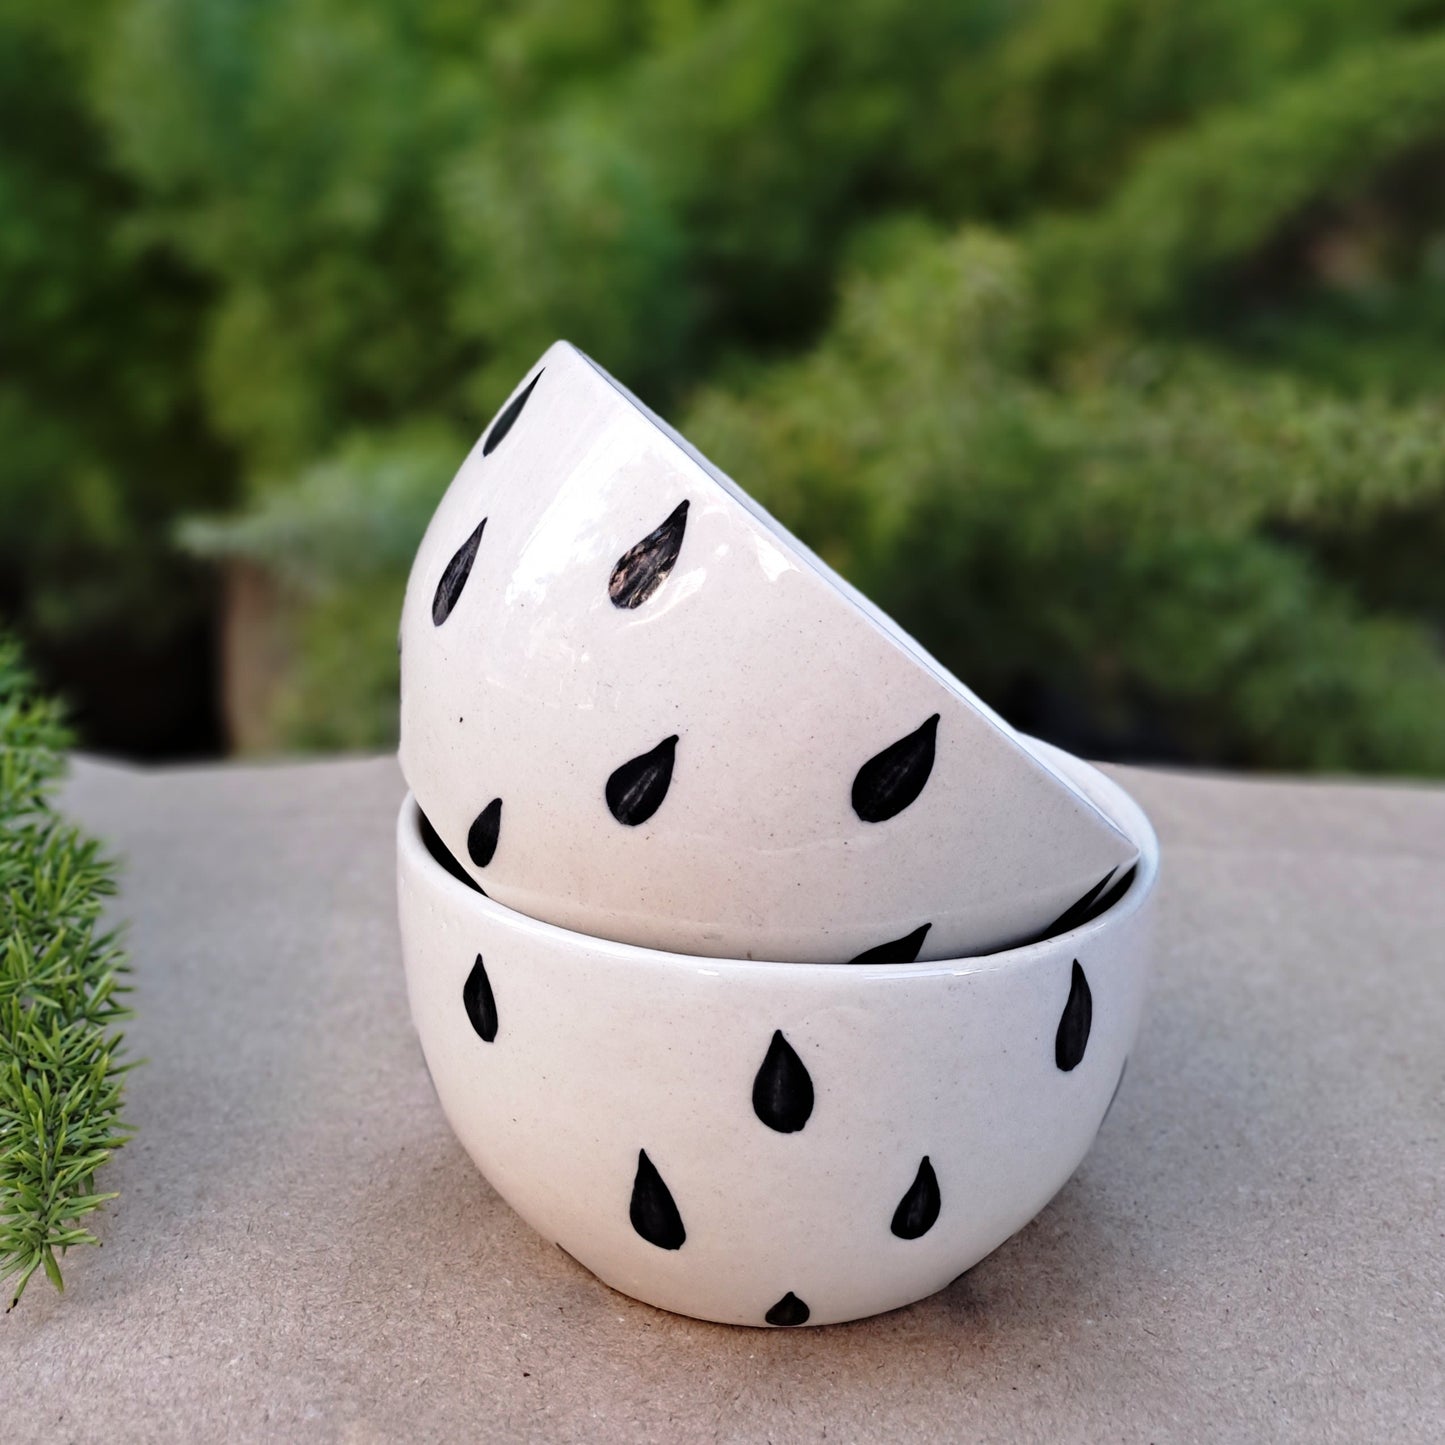 HAND PAINTED CERAMIC BOWLS (SET OF 2)